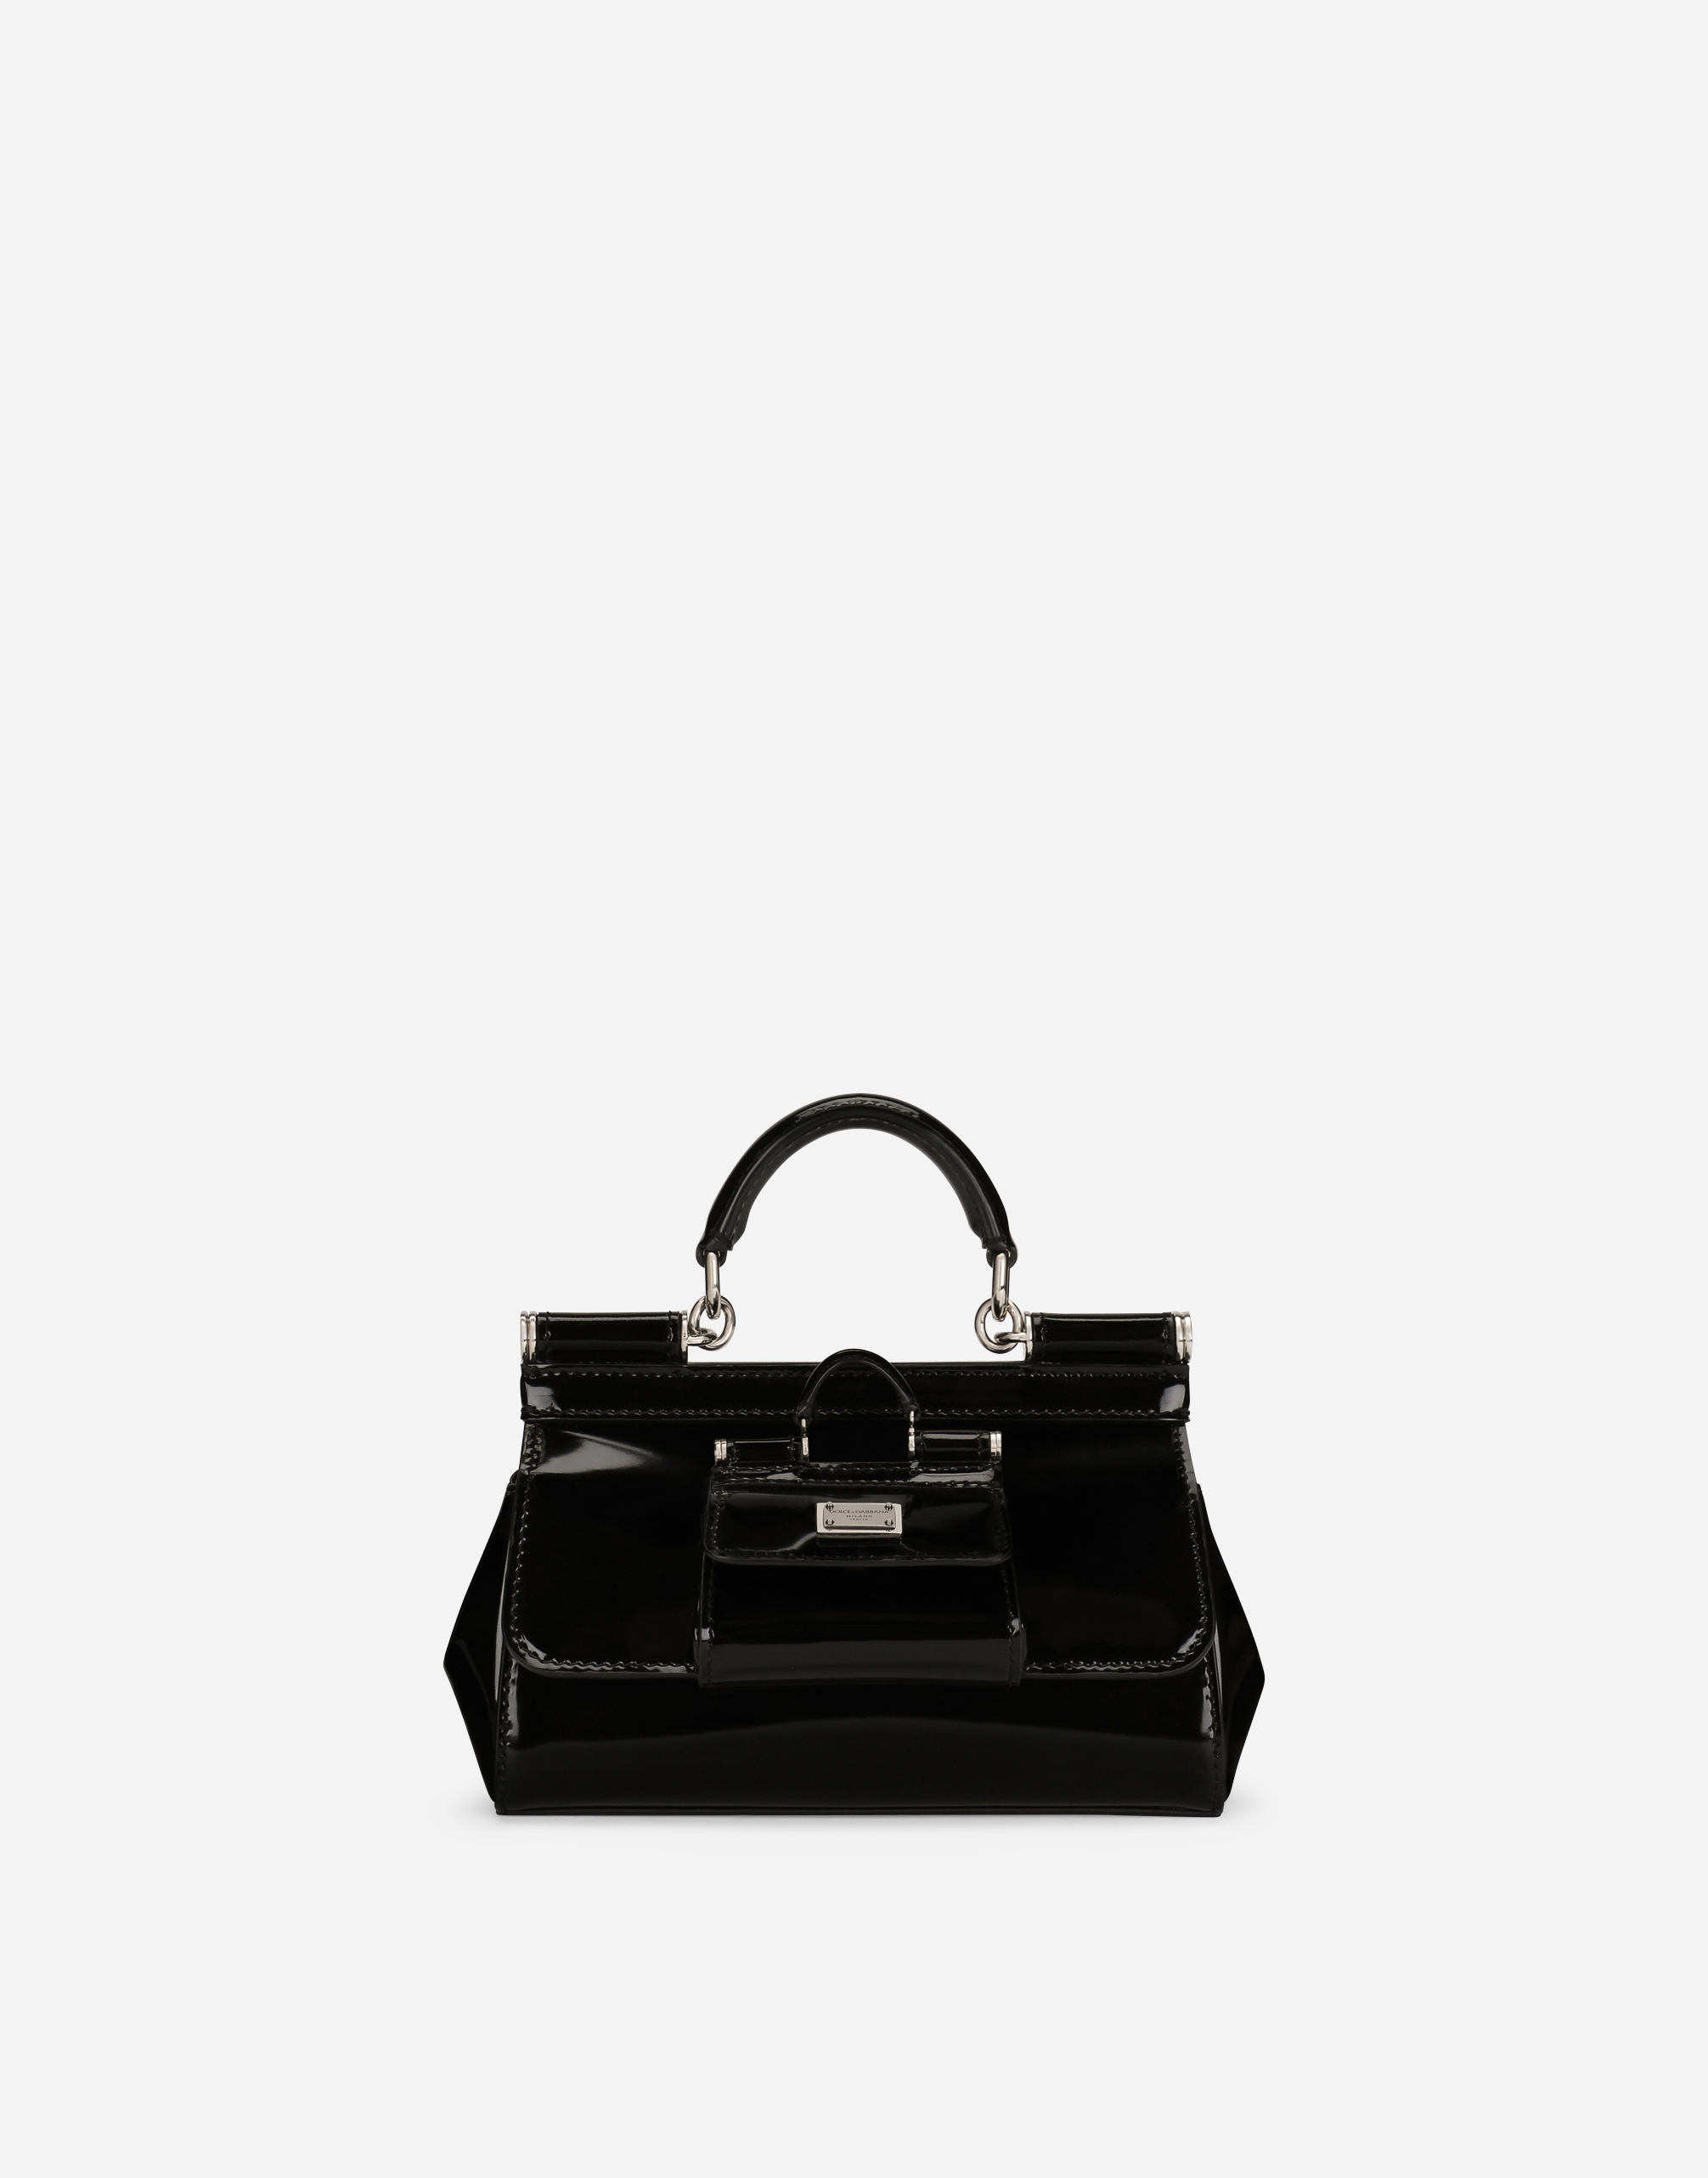 Dolce & Gabbana Patent Leather Small Sicily Bag With Coin Purse in